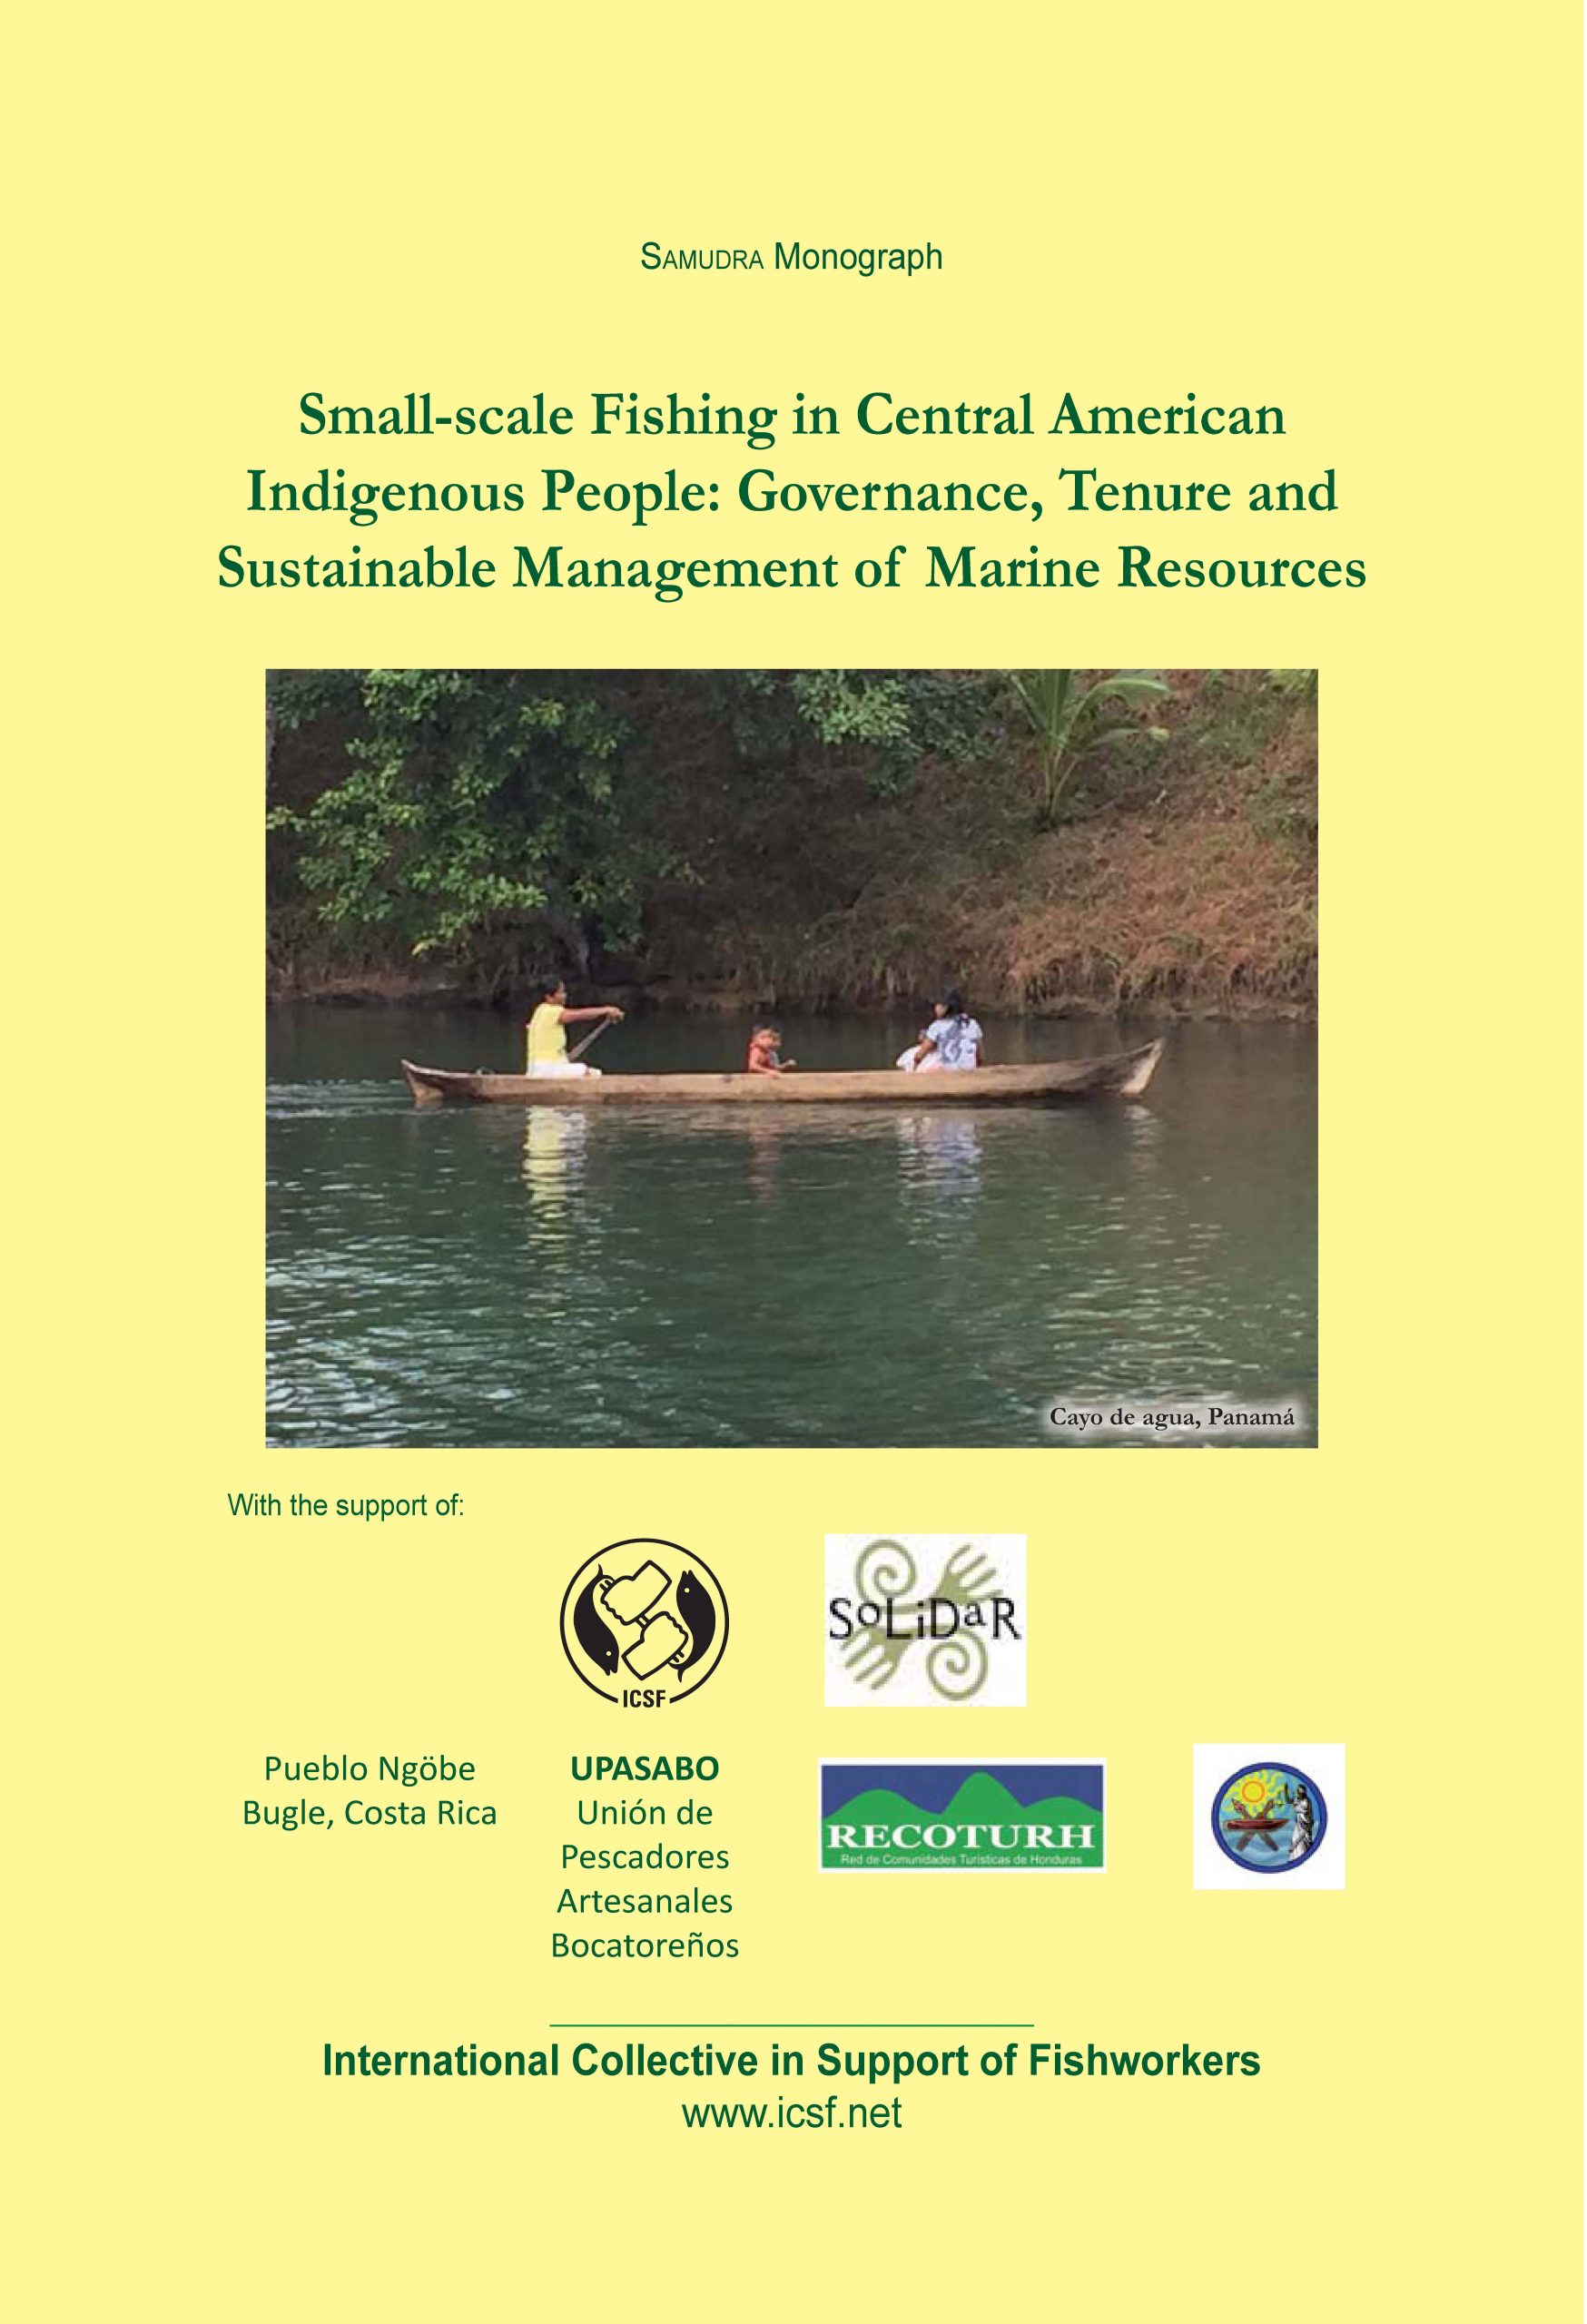 Small-scale Fishing in Central American Indigenous People: Governance, Tenure and Sustainable Management of Marine Resources